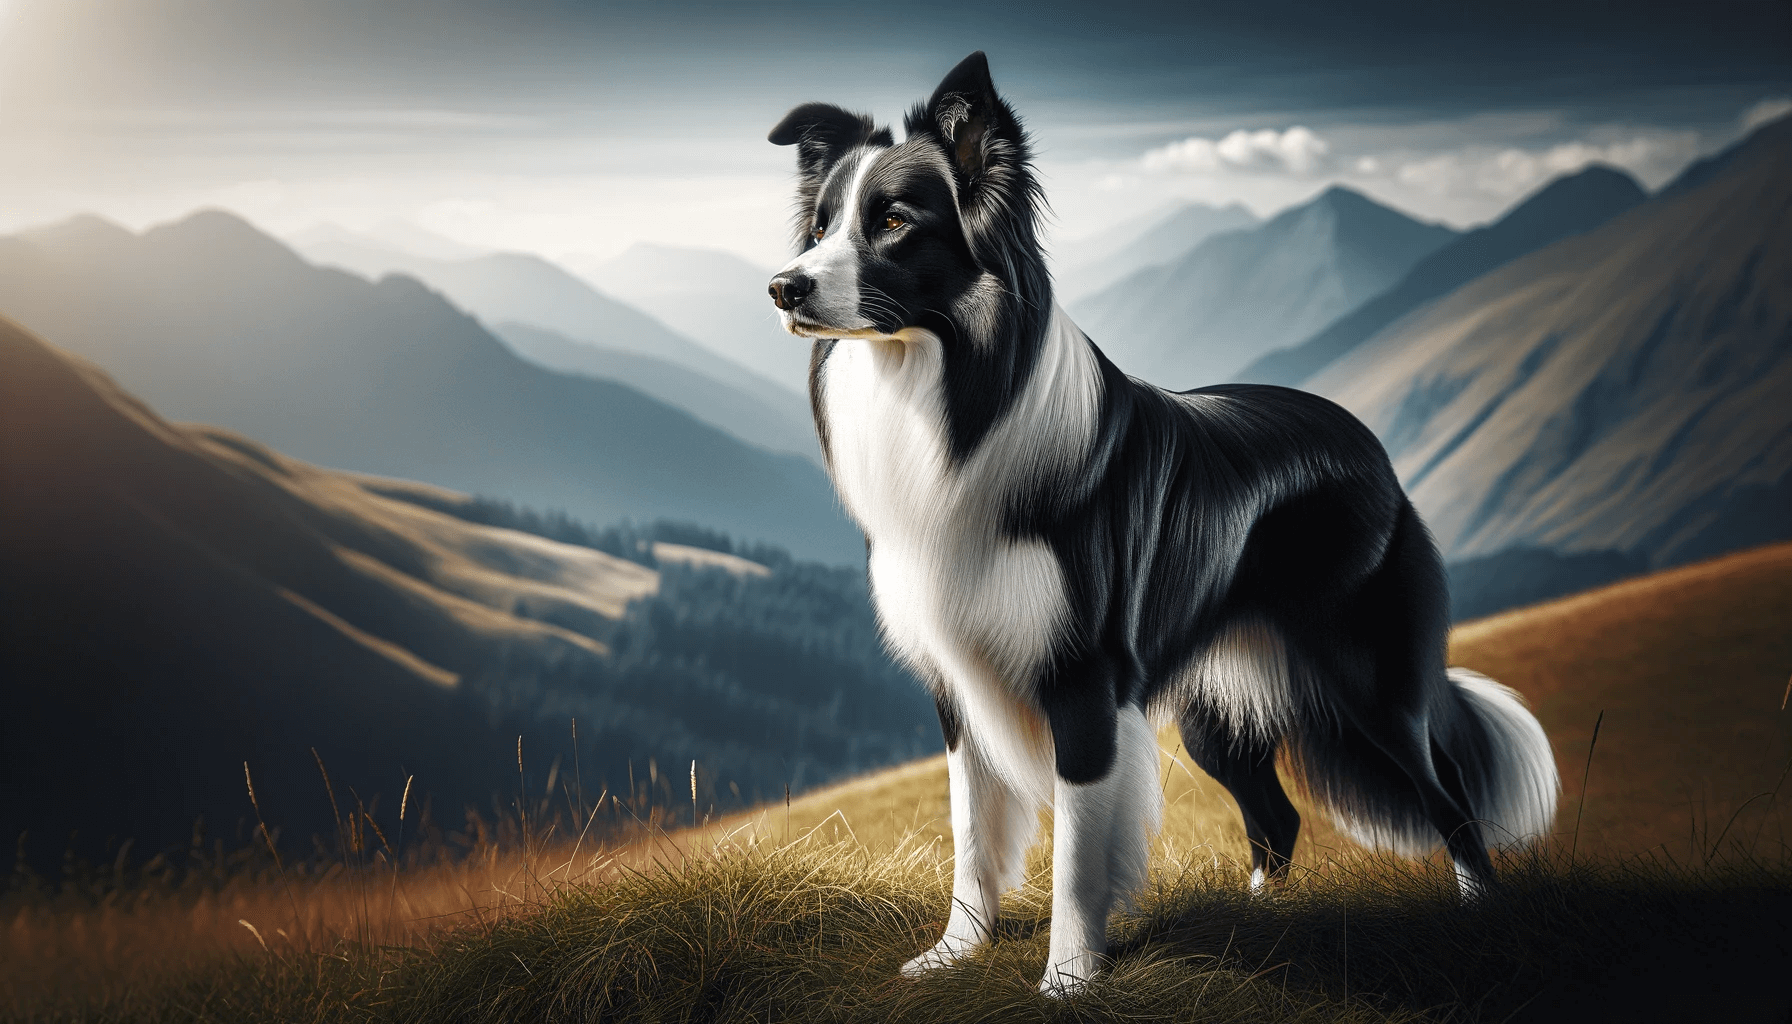 Unique features of Smooth Coat Border Collies on a grassy hill.